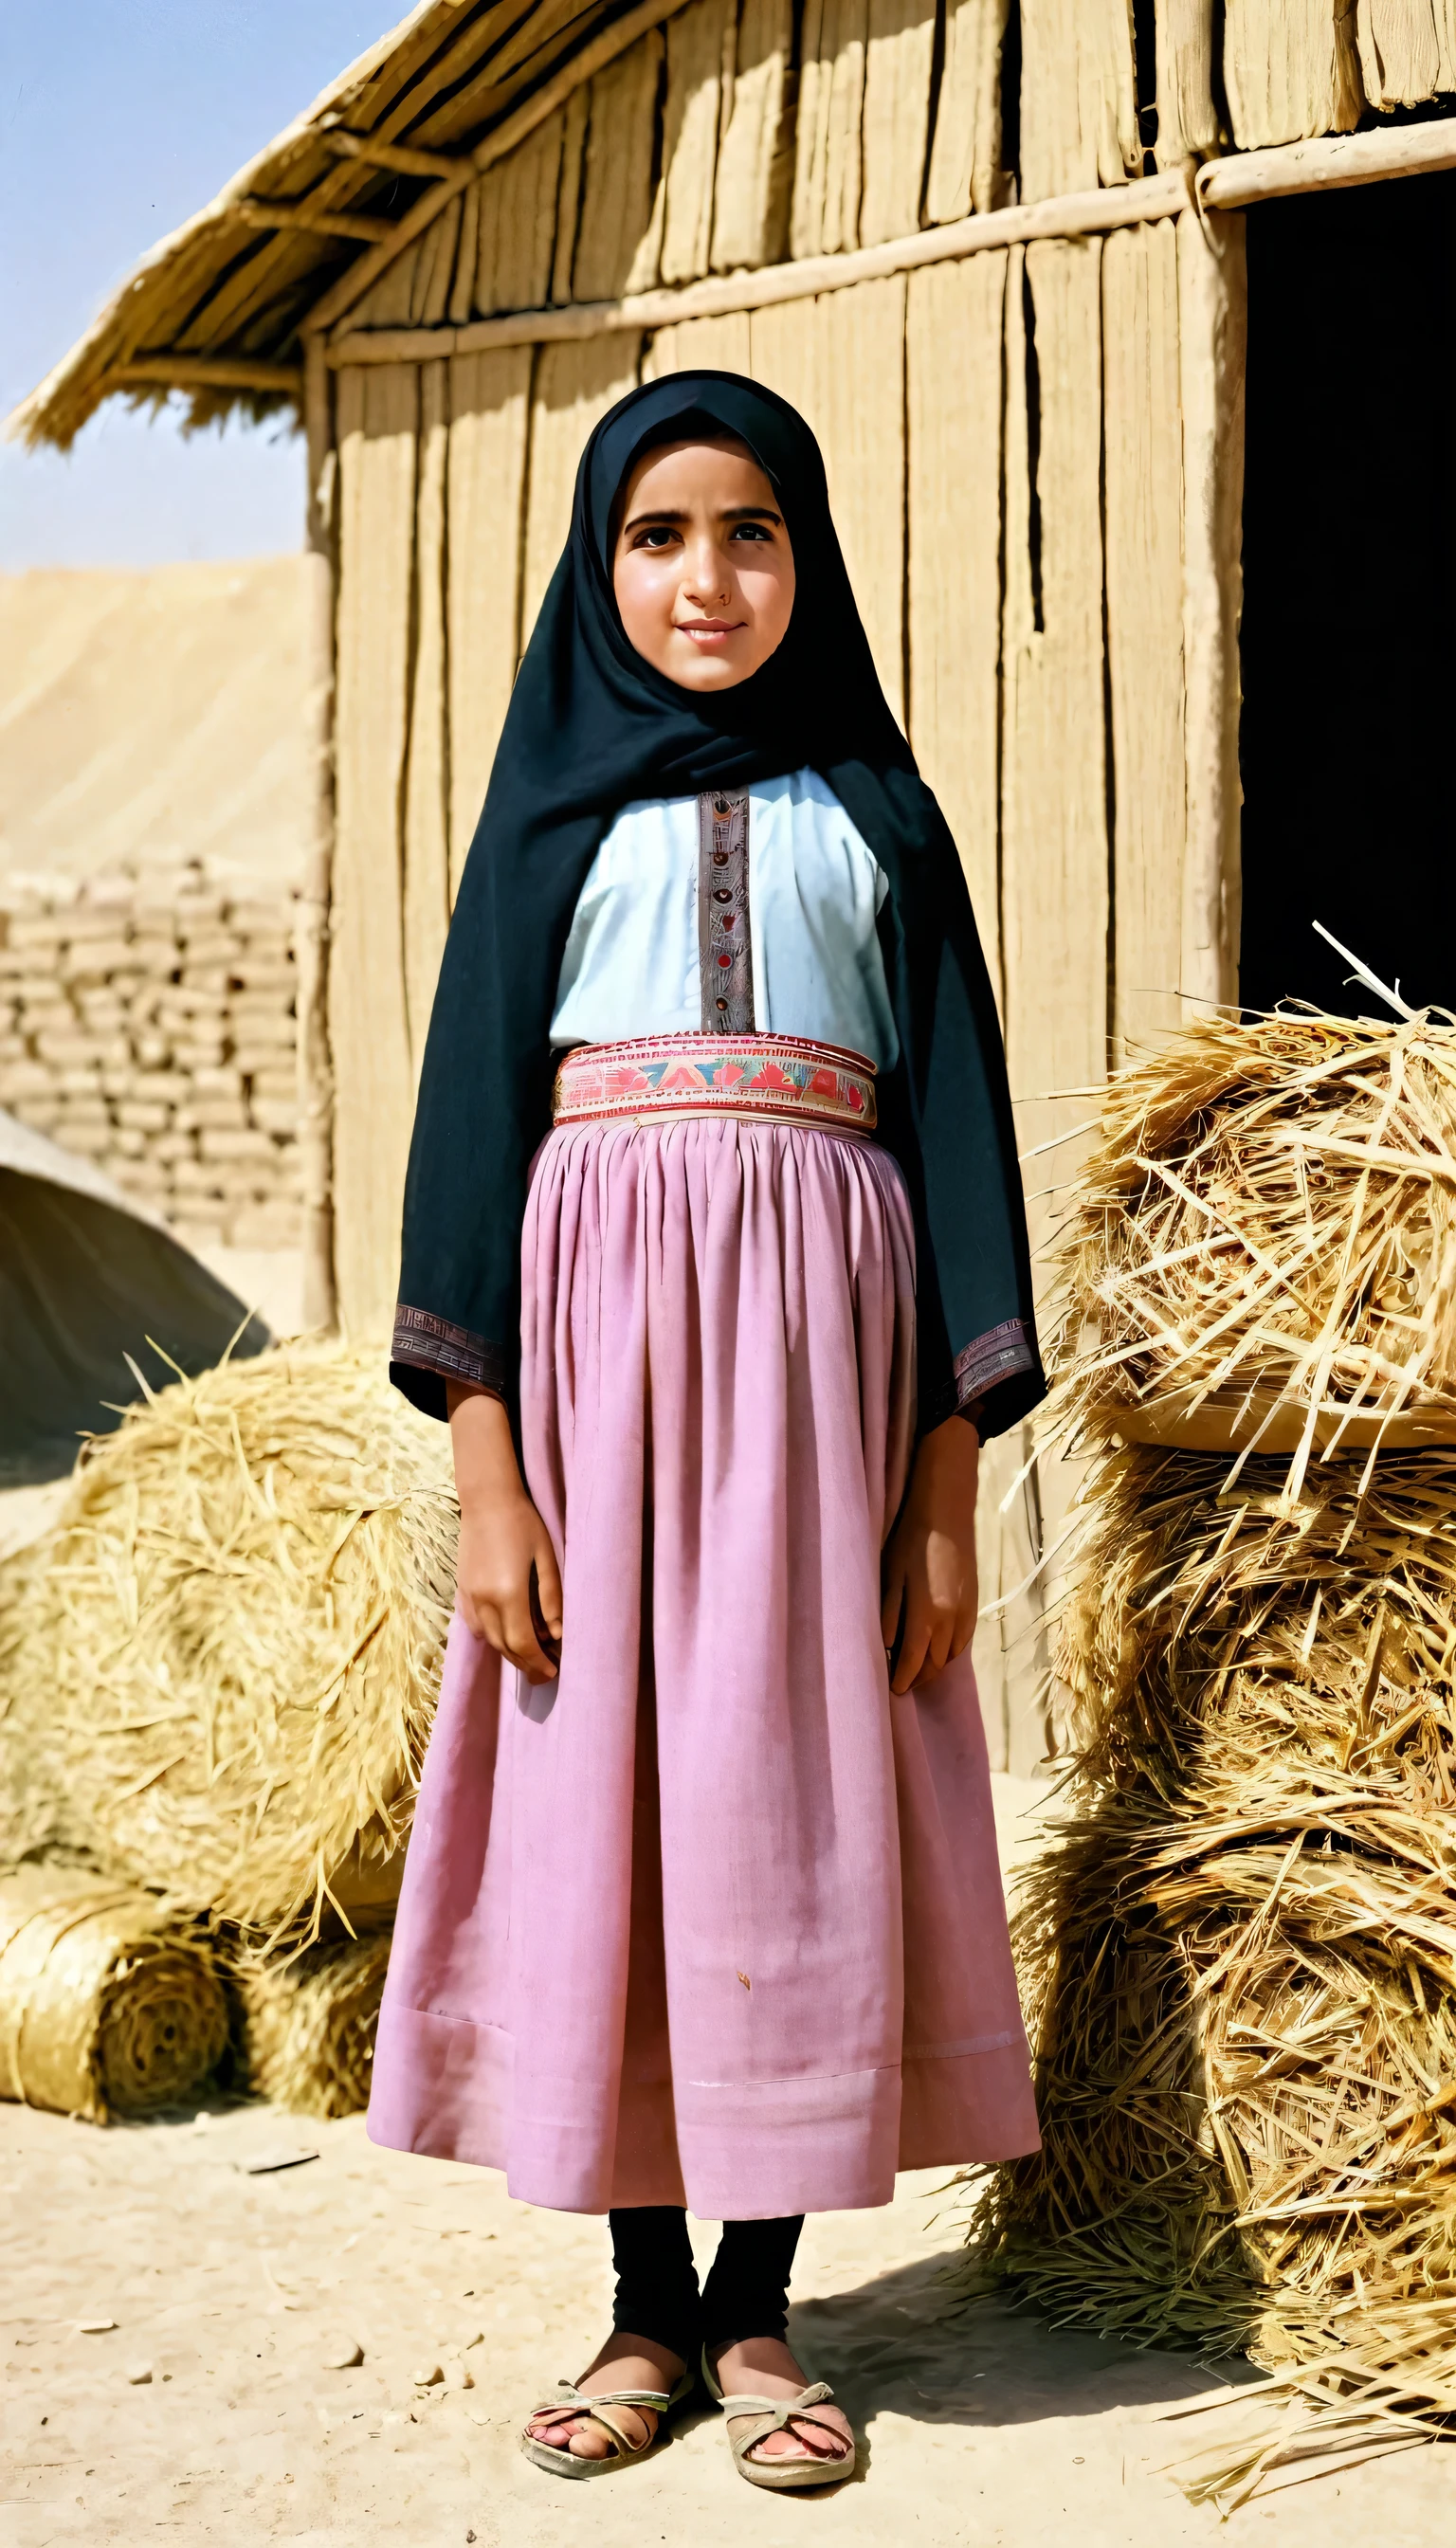 1girl, 10-years old, solo, an Iraqi  wearing traditional clothing at the theshold of a hut, wearing hijab, background includes hay and outdoor elements, black_hair, standing, looking_at_viewer, 1950s